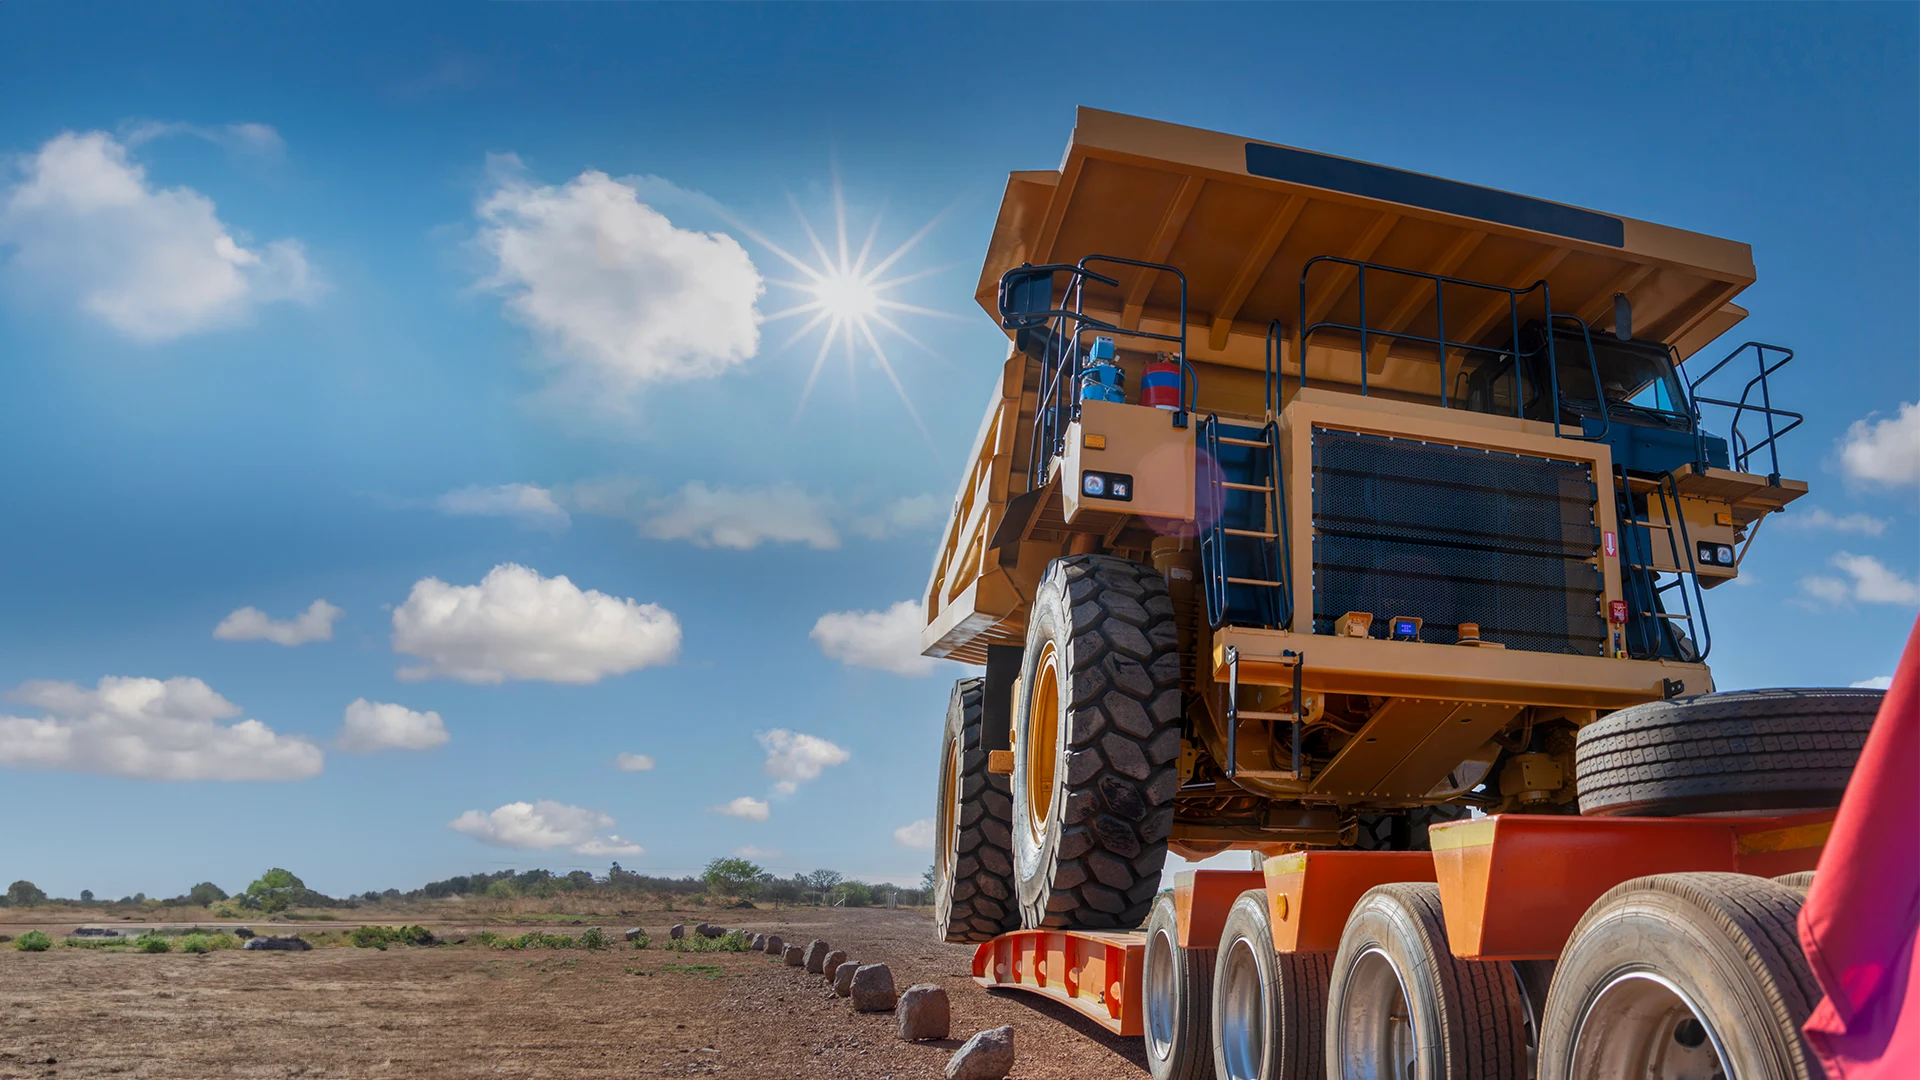 Large mining truck on a RGN trailer, sunny sky, dry landscape.